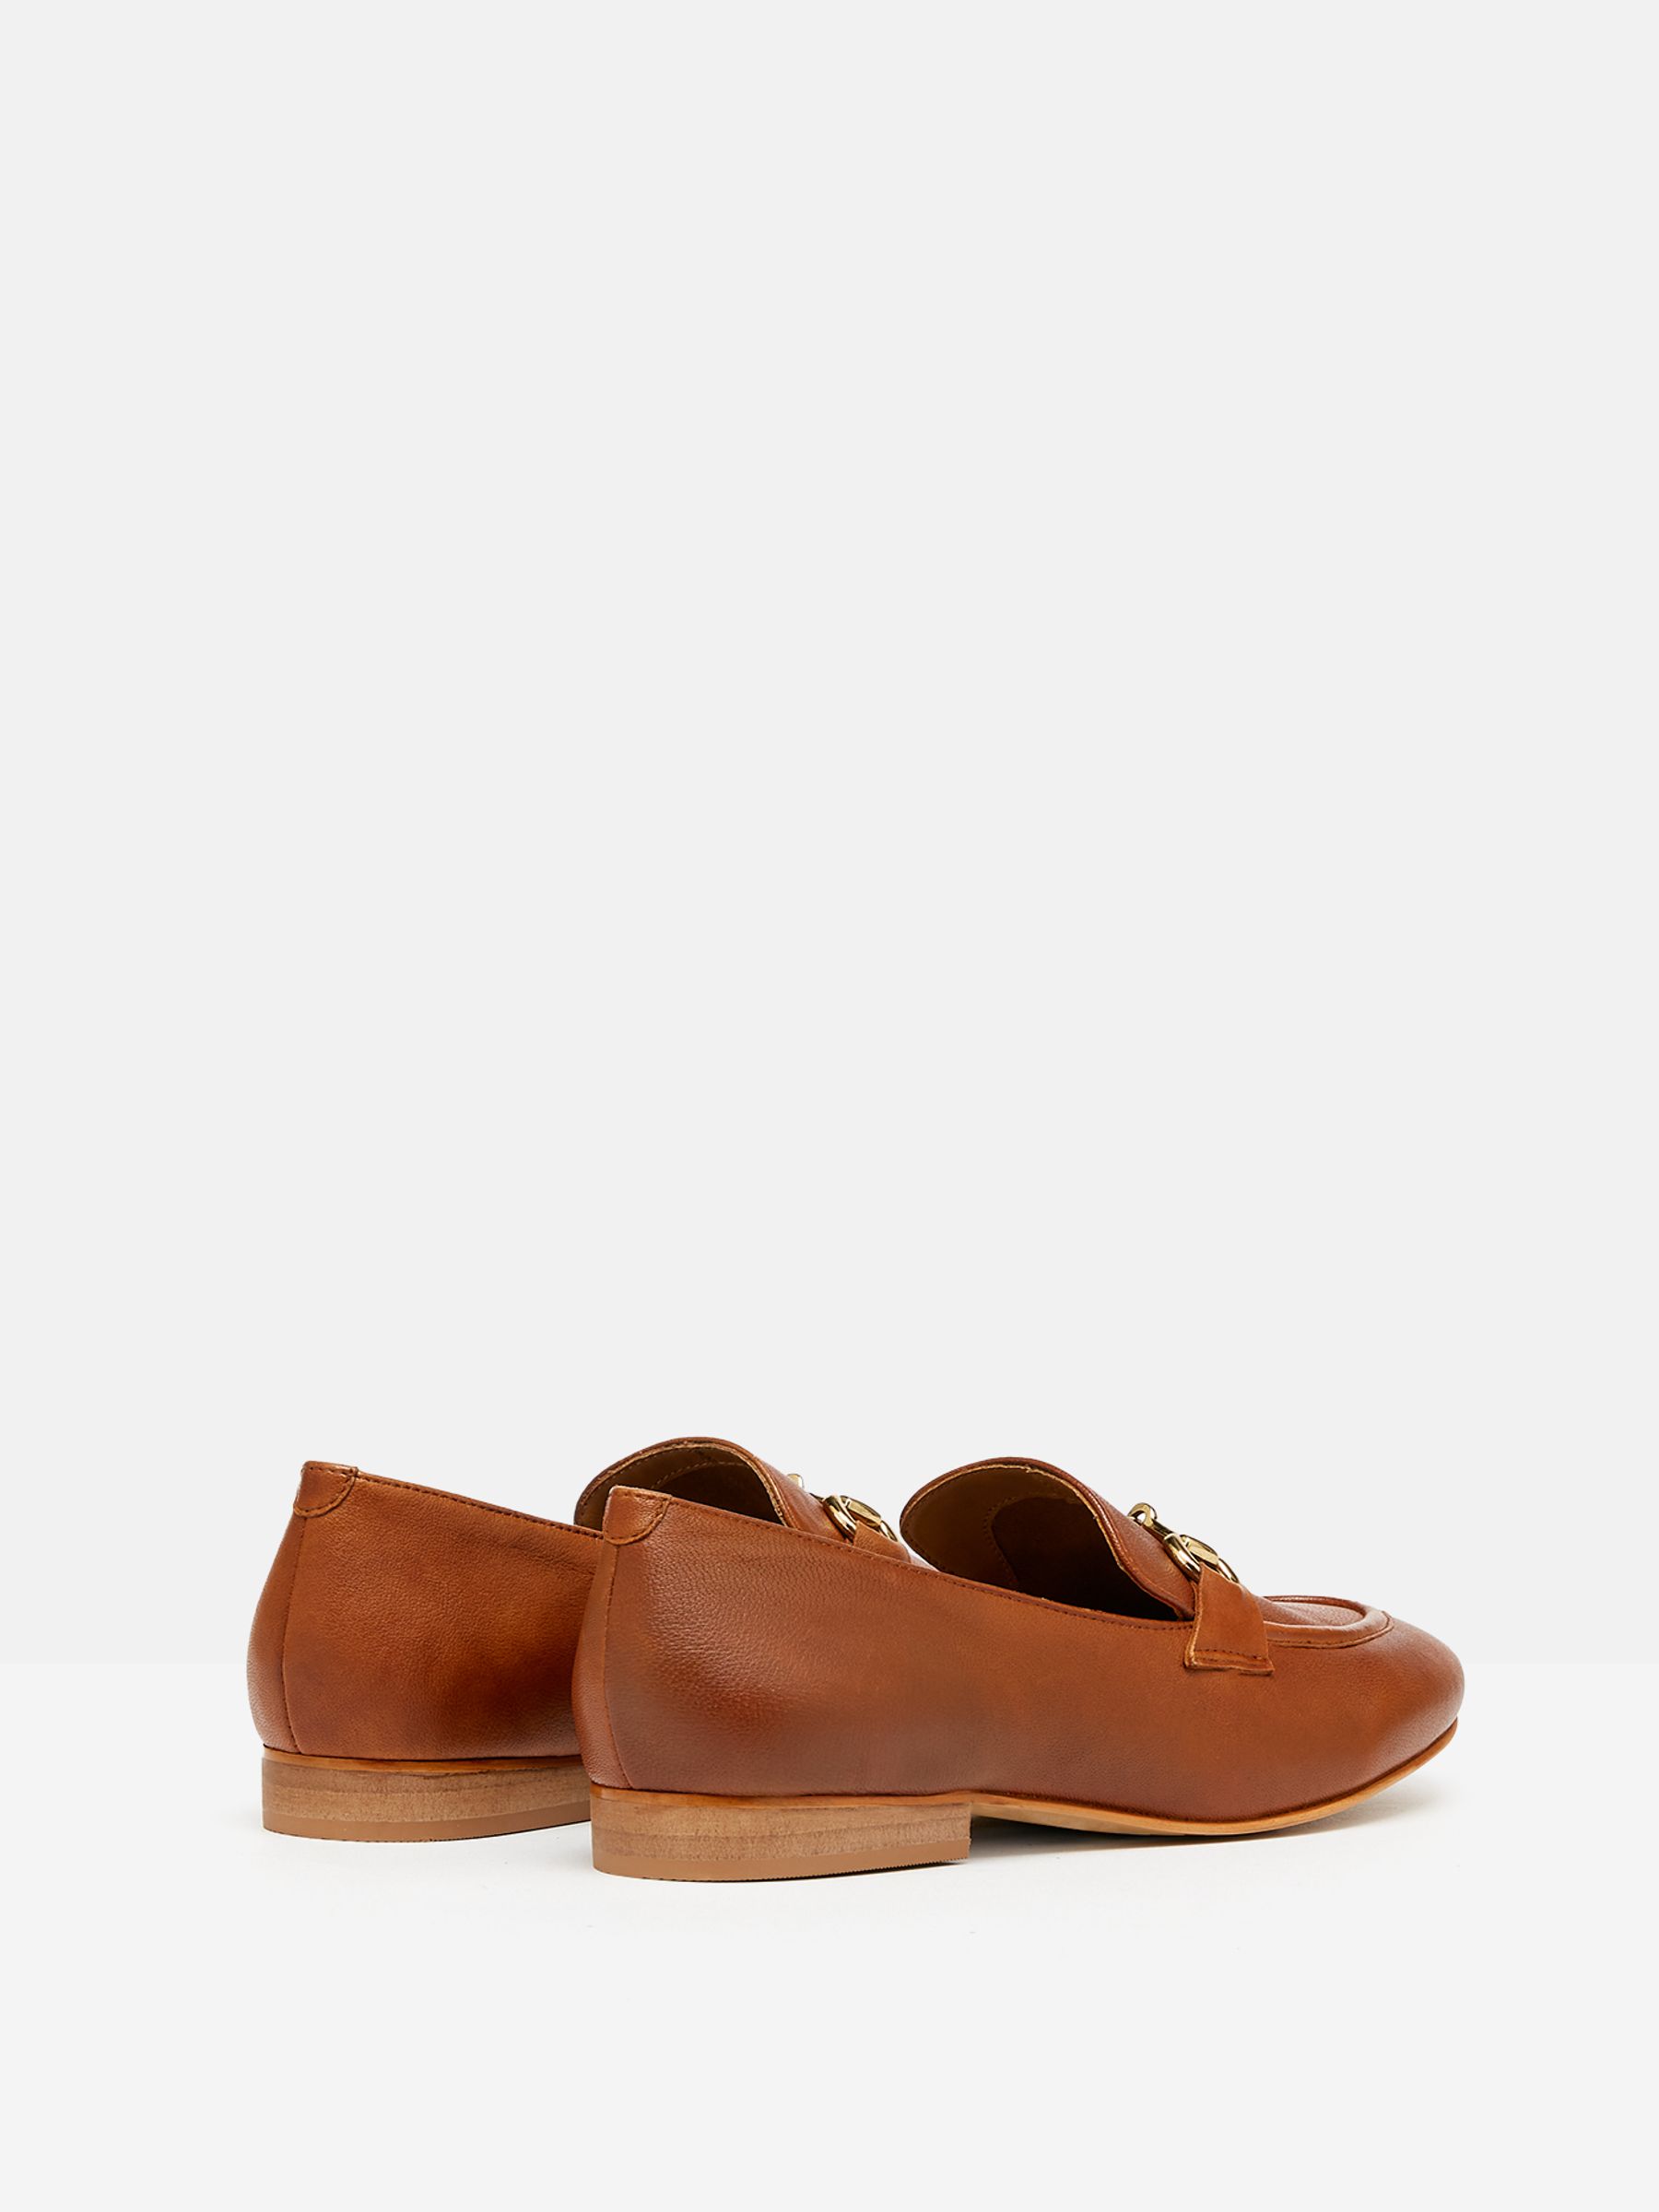 Buy Verity Brown New Slimline Loafers from the Joules online shop